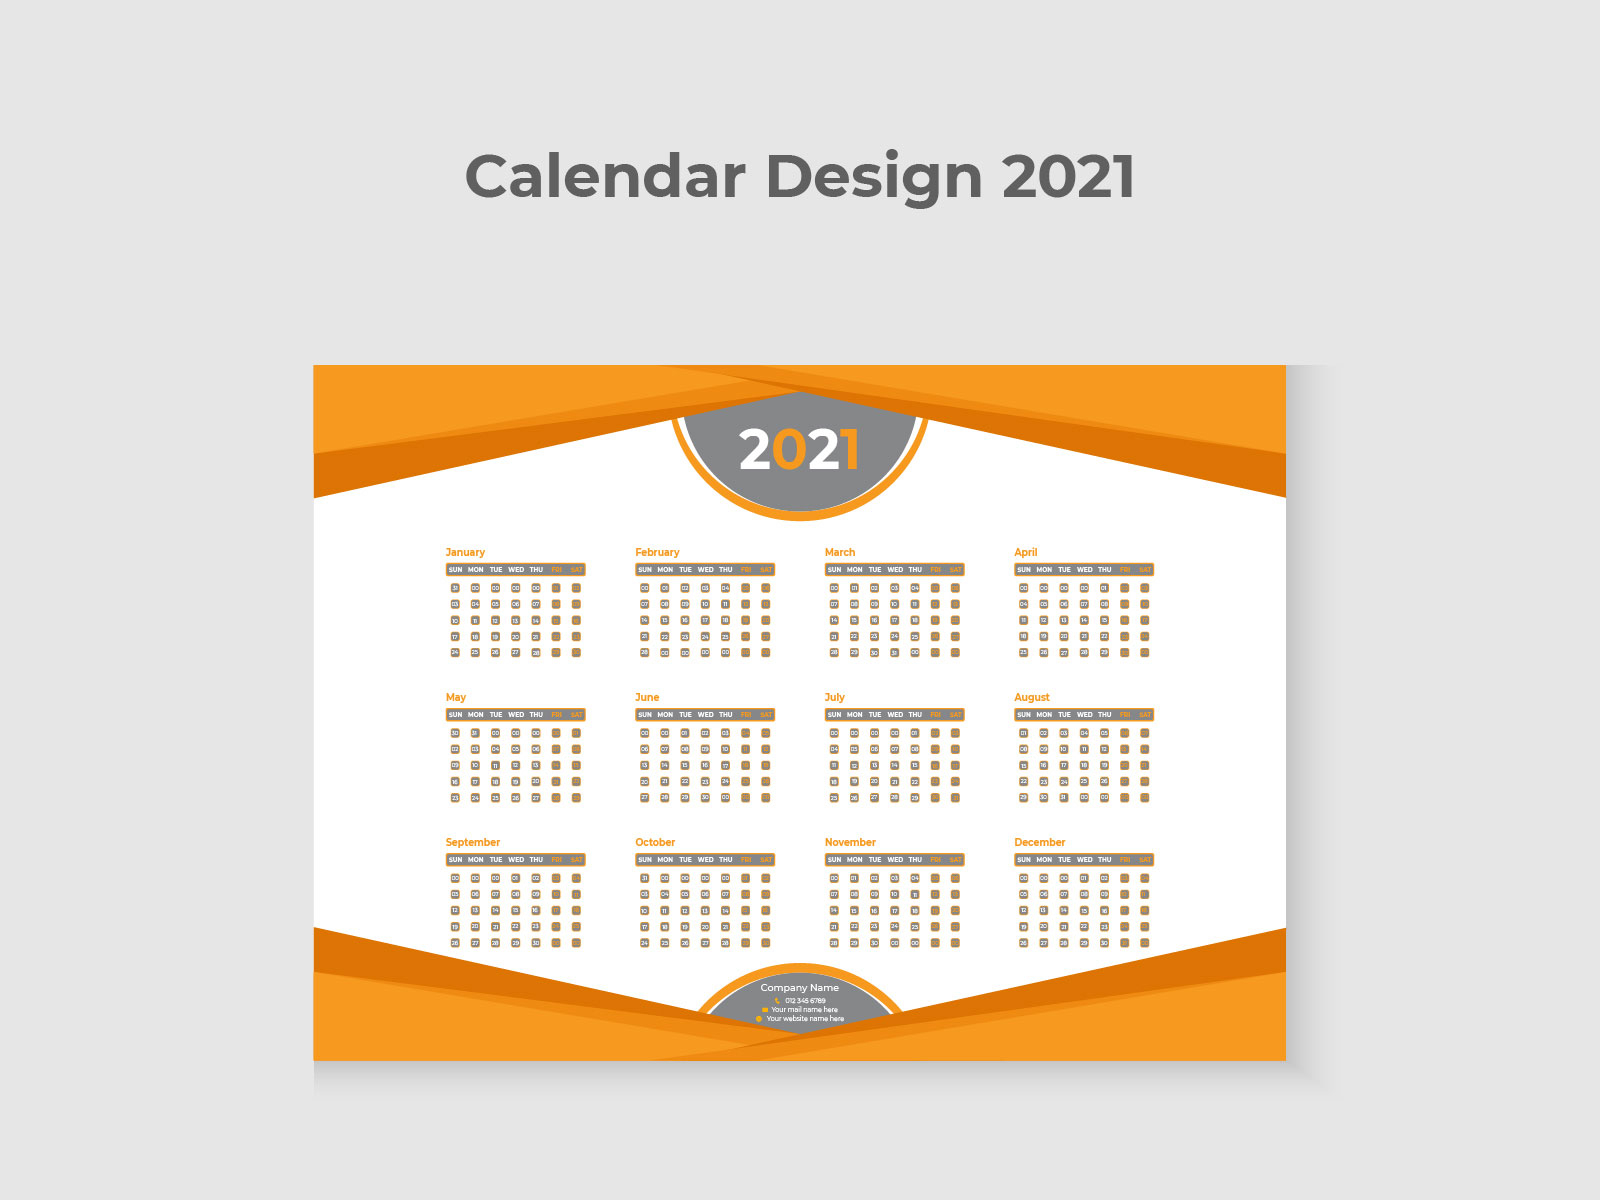 2021 One Page Wall Calendar Design by Kornel Hawee on Dribbble